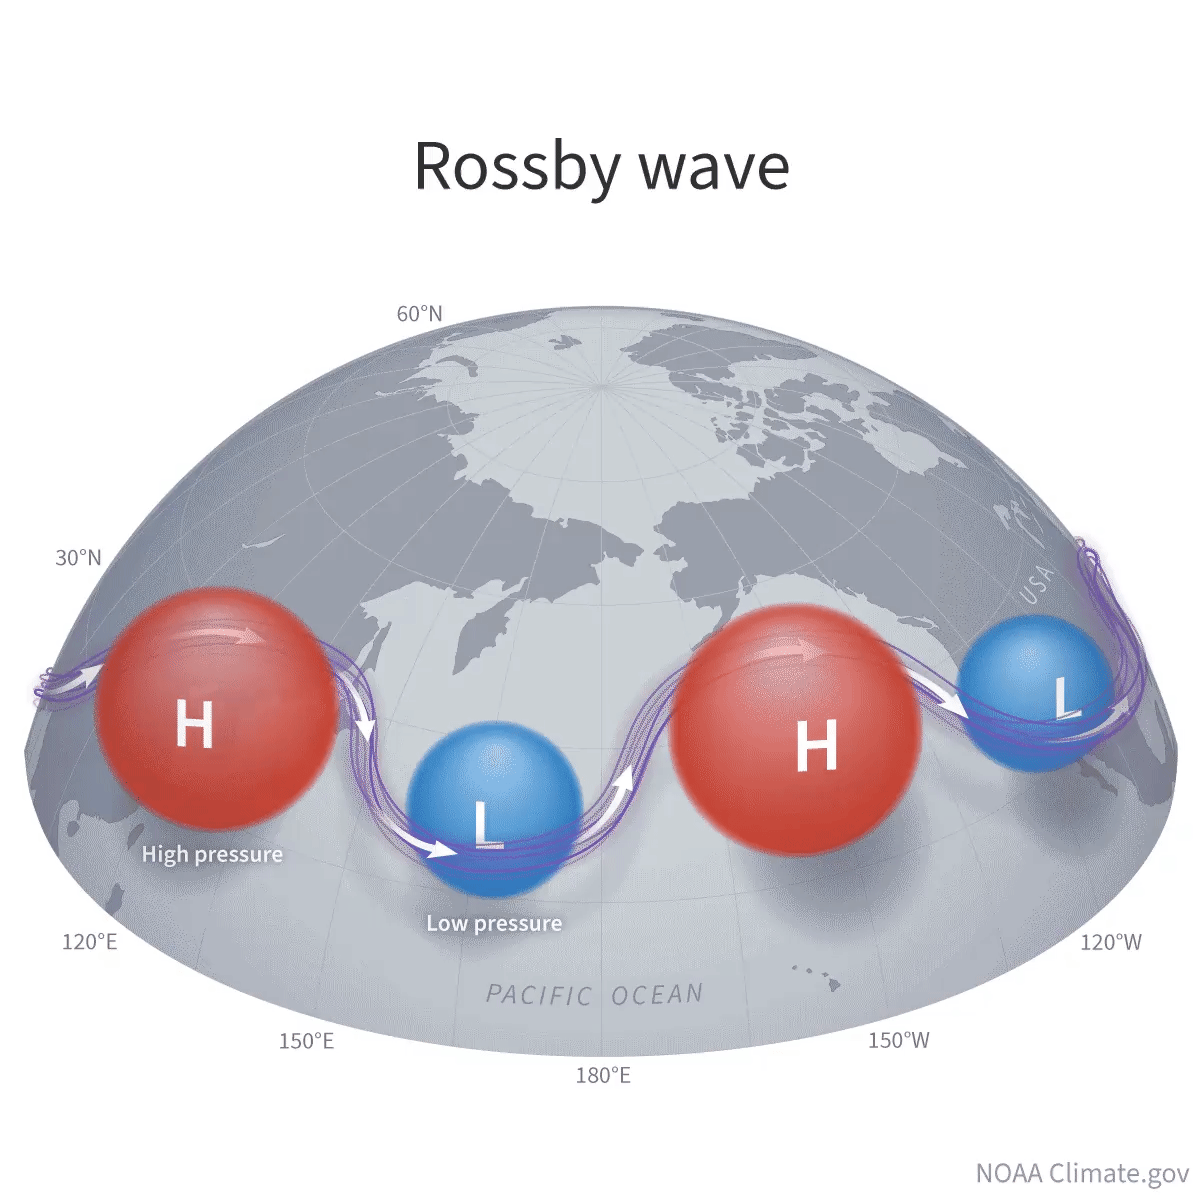 Animation of rossby wave breaking. First image shows a pattern of red circle, blue circle, red circle, blue circle, across the Pacific ocean. Snaking between those circles is a line representing the jet stream. Second image shows a rossby wave breaking. Here the two red and blue circles on the right near the West coast are now stacked one of the other. The line of the jet stream is now contorted to look like a wave that is breaking.